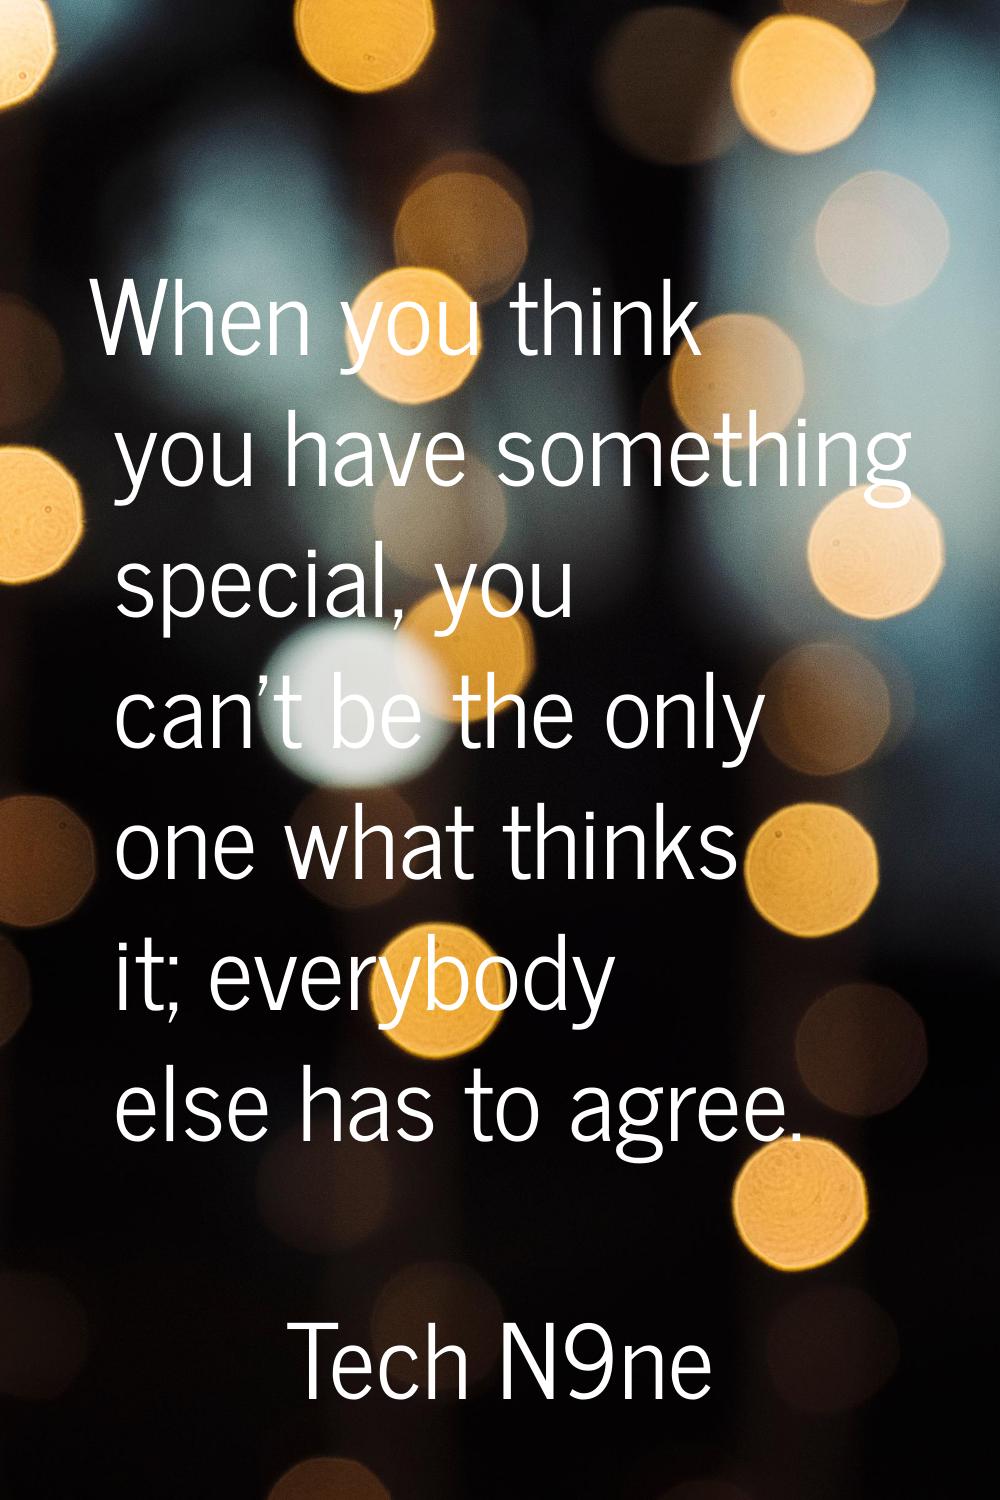 When you think you have something special, you can't be the only one what thinks it; everybody else